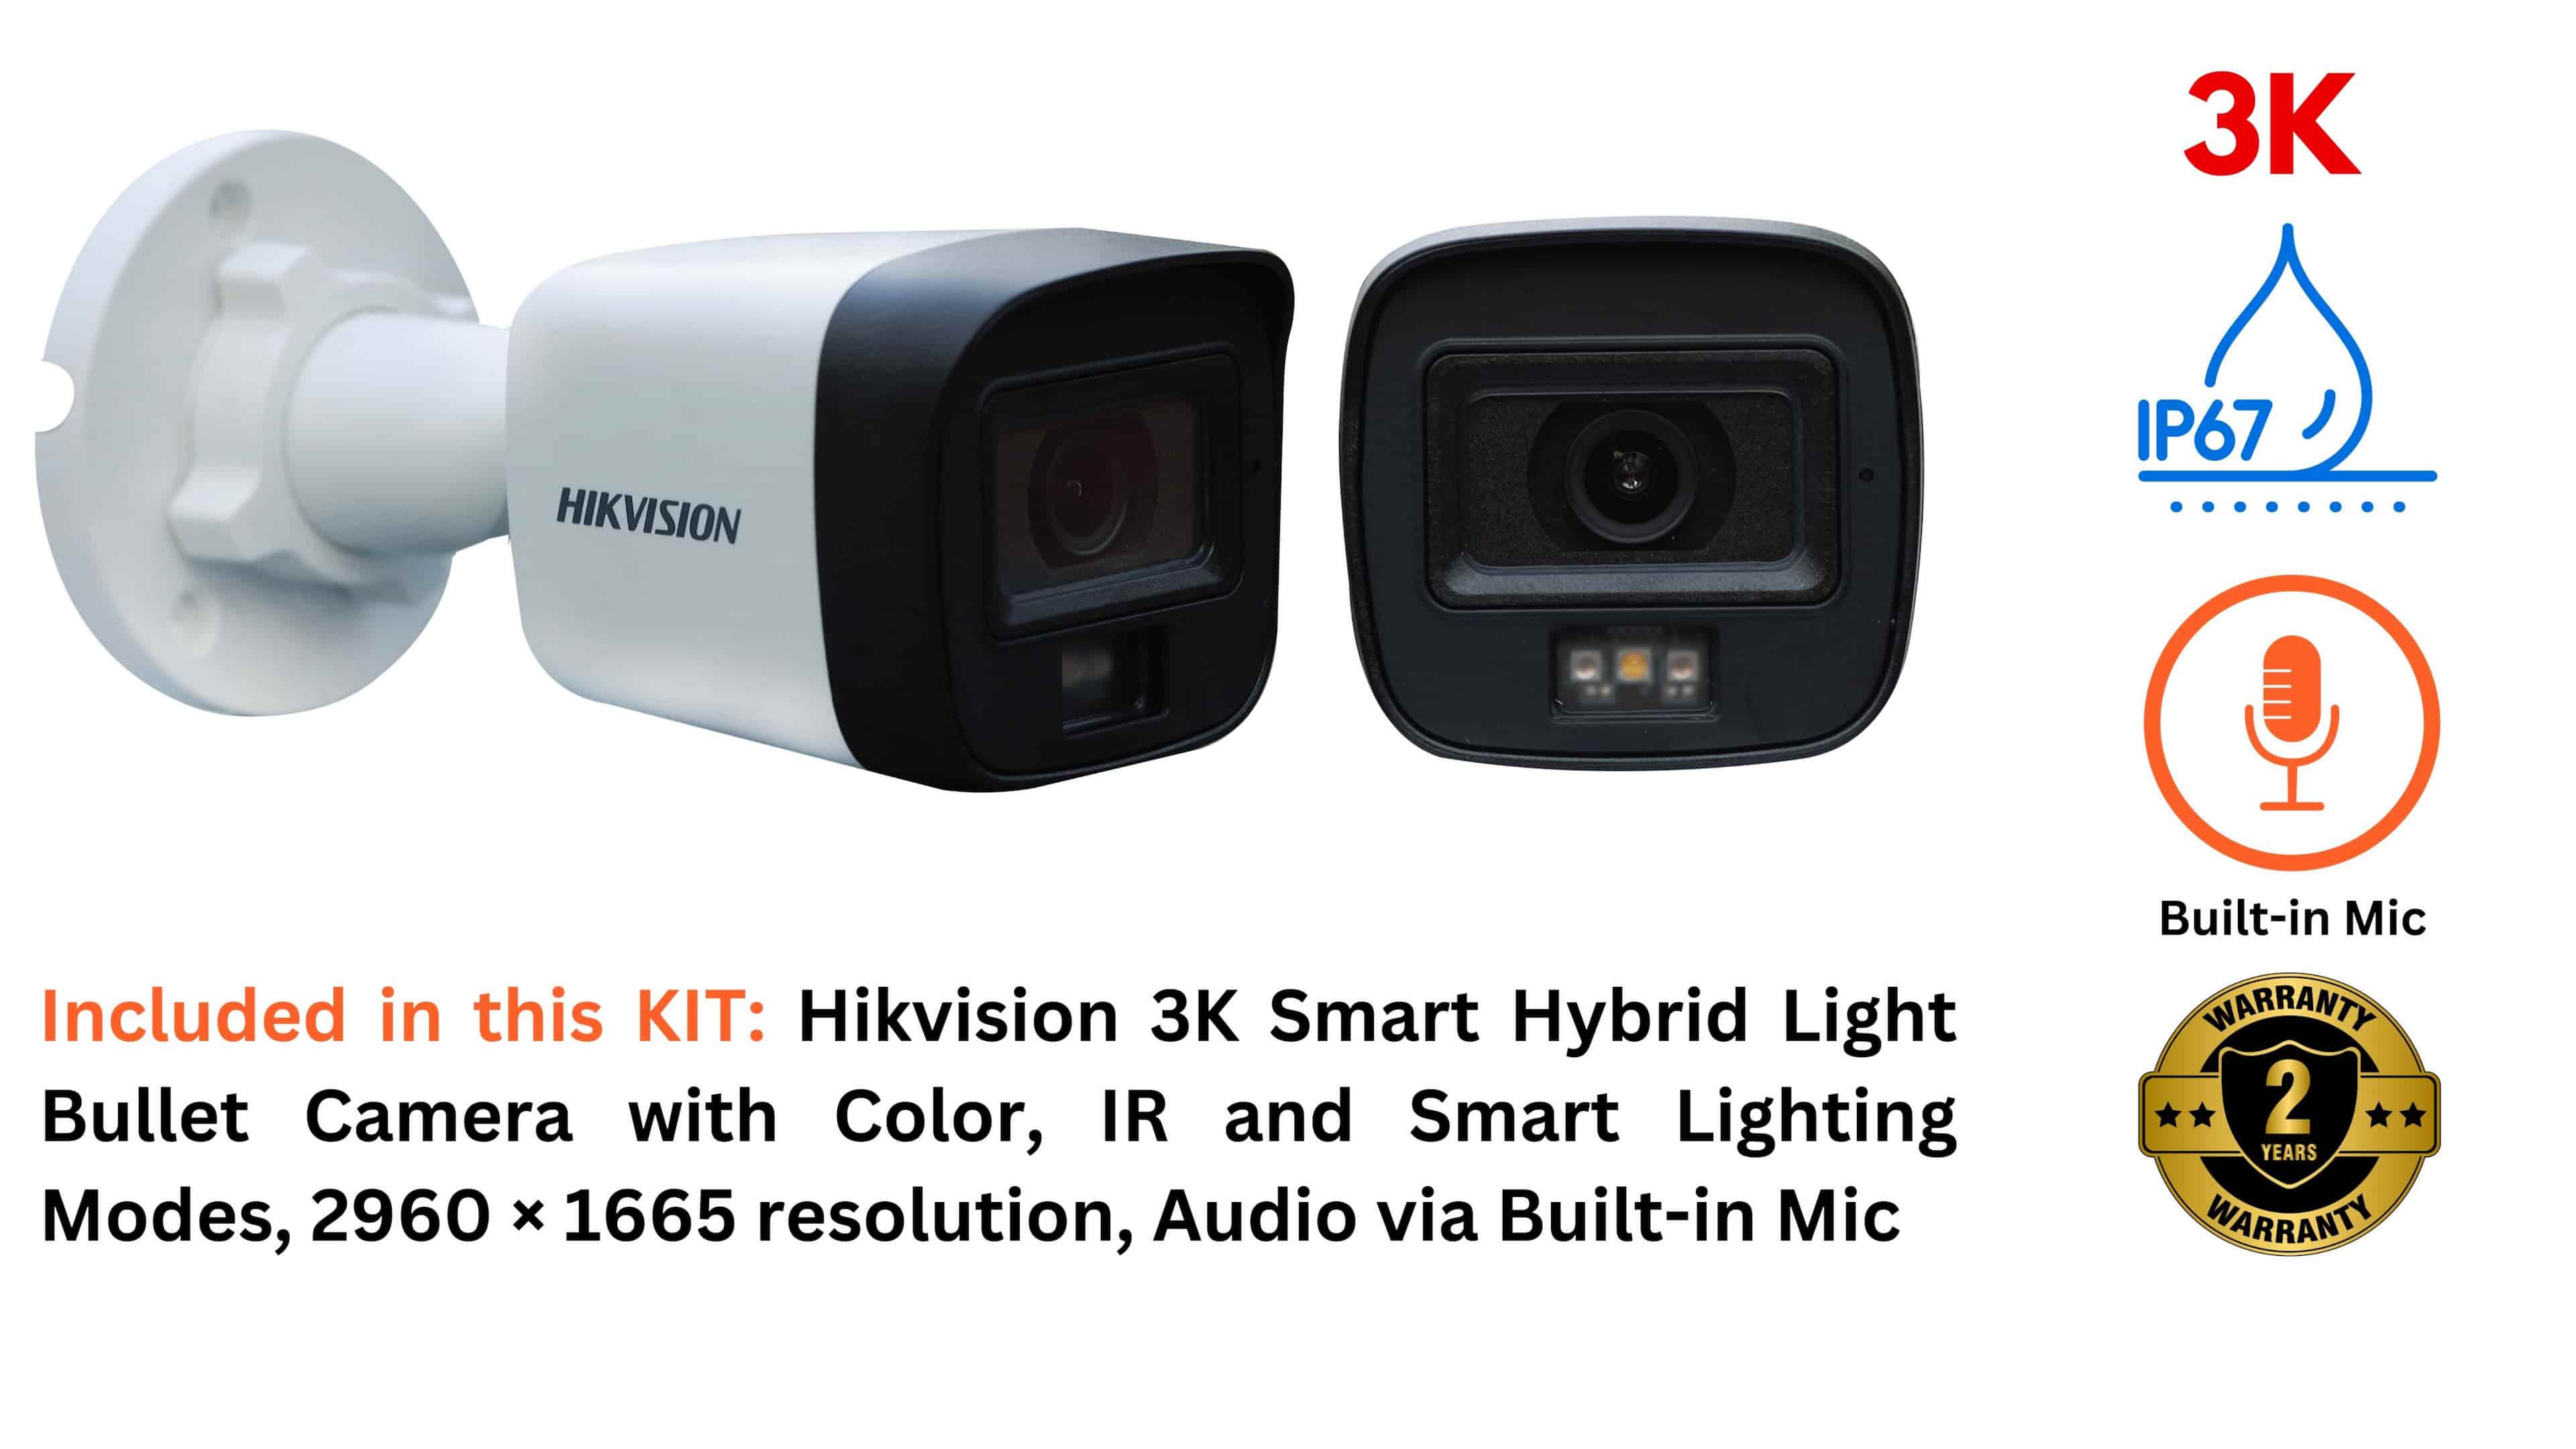 HIKVISION 4 CCTV Camera Full Set with 4 Channel 5MP DVR, 4x 5MP Smart Hybrid Cameras, 500GB HDD, Cable Roll, 4 CH Power Supply, BNC, DC, Cobox & HDMI